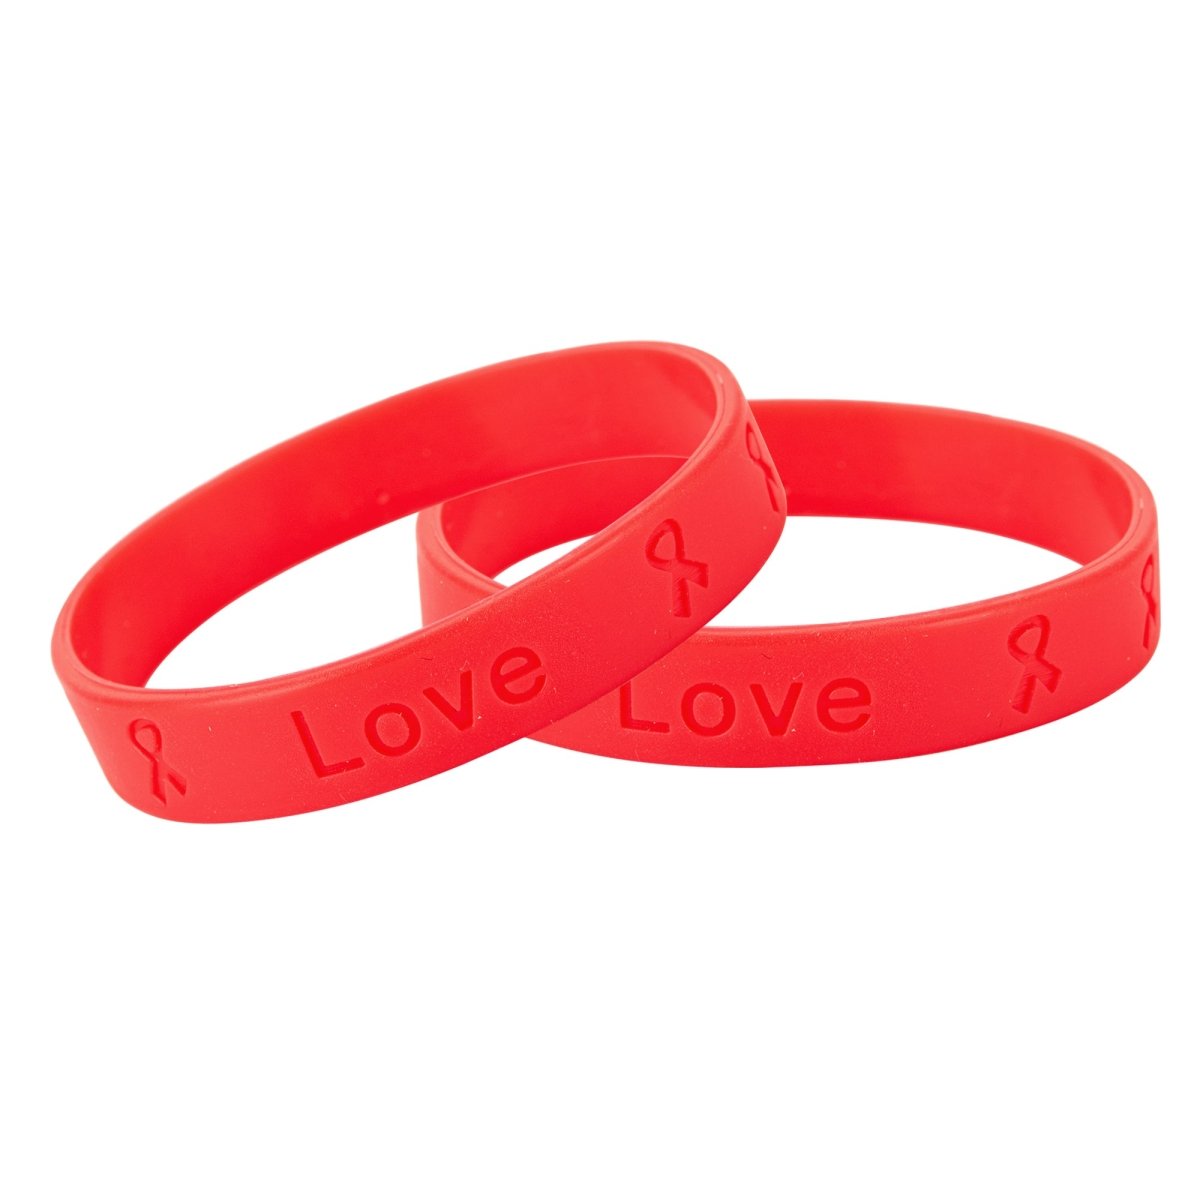 Cardiovascular Disease Red Awareness Silicone Bracelet Wristbands - Fundraising For A Cause